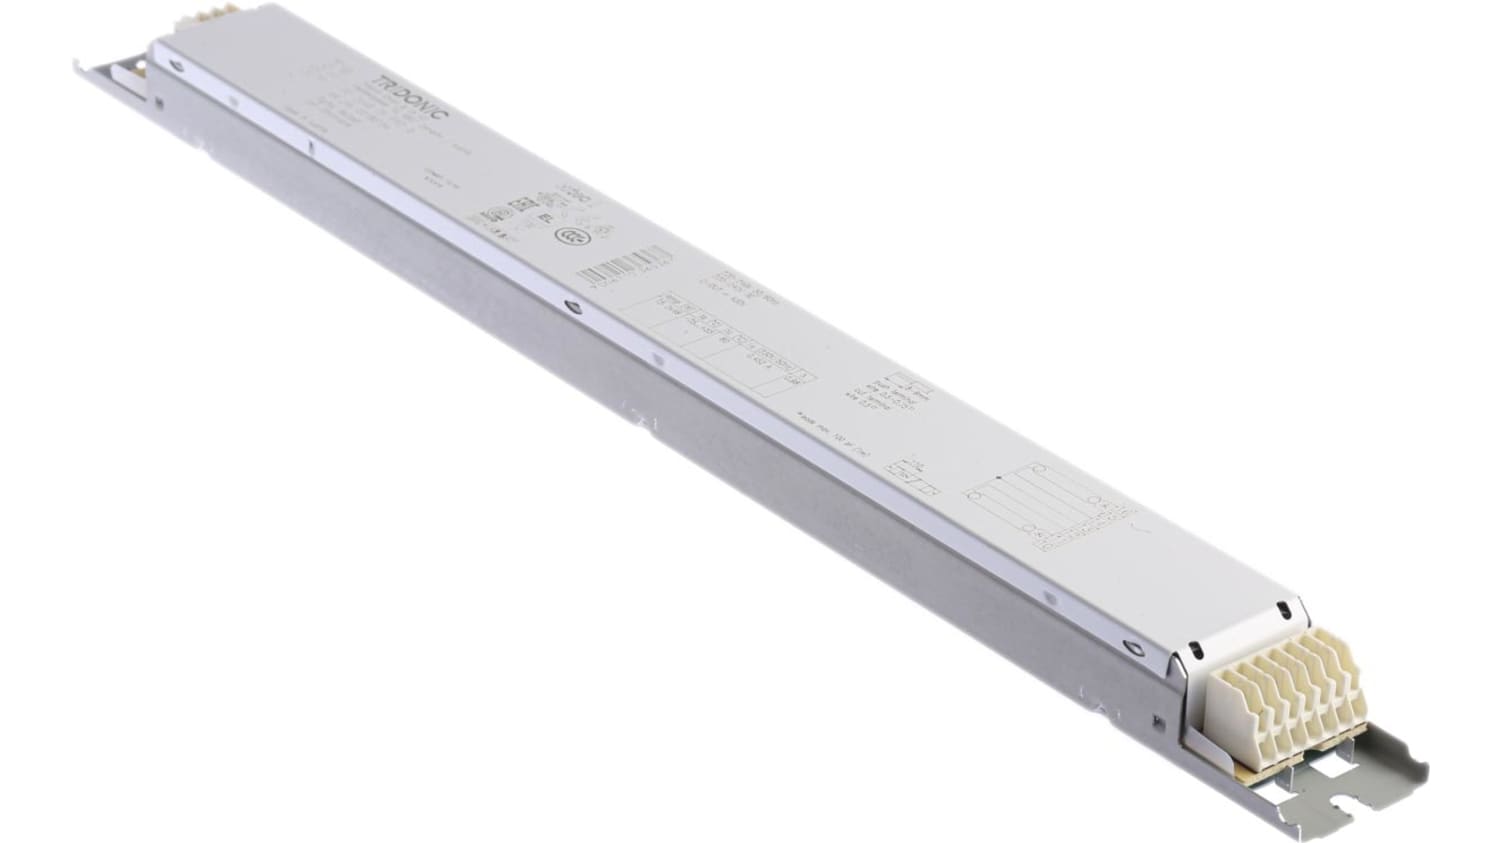 Tridonic 49 W Electronic Fluorescent Lighting Ballast 2 240 V Rs Components